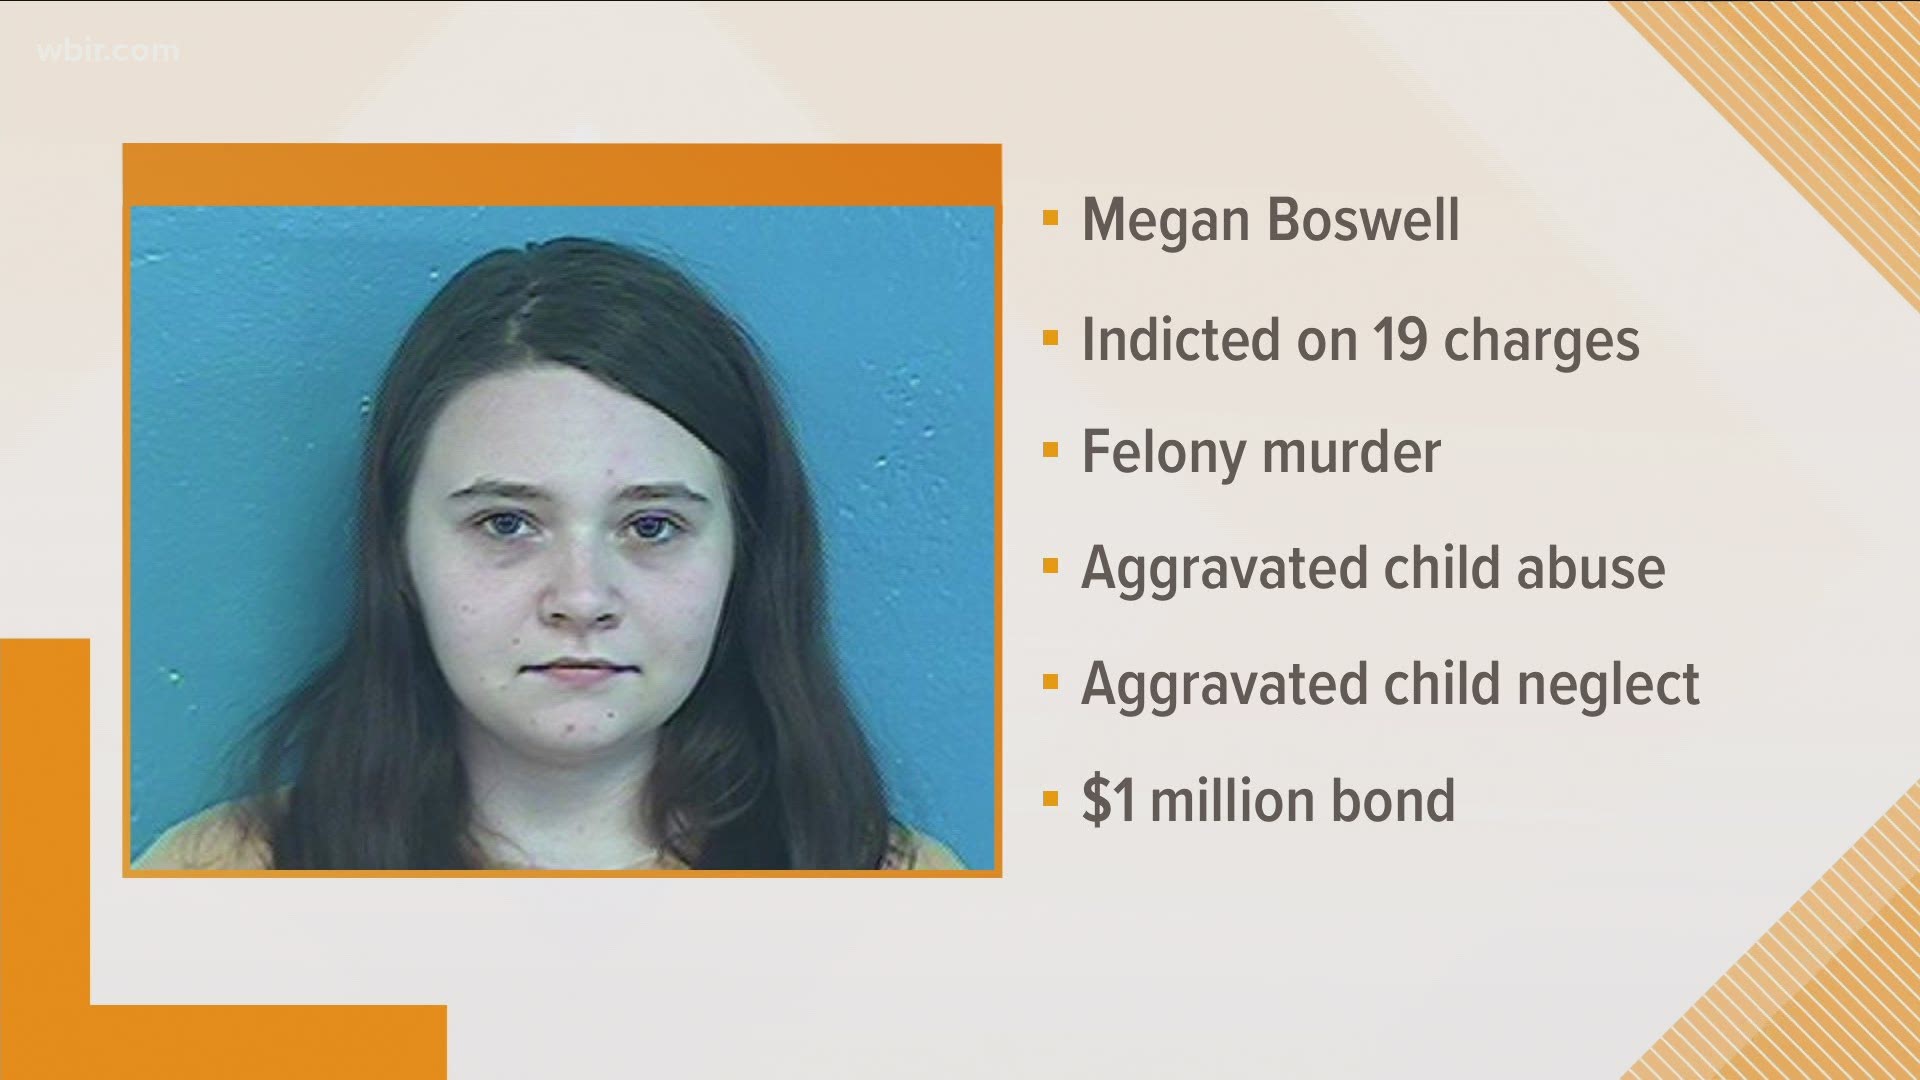 Megan Boswell is set to be arraigned Friday at 9 a.m. in Sullivan County Criminal Court via video. We will continue to update you, as well learn more.